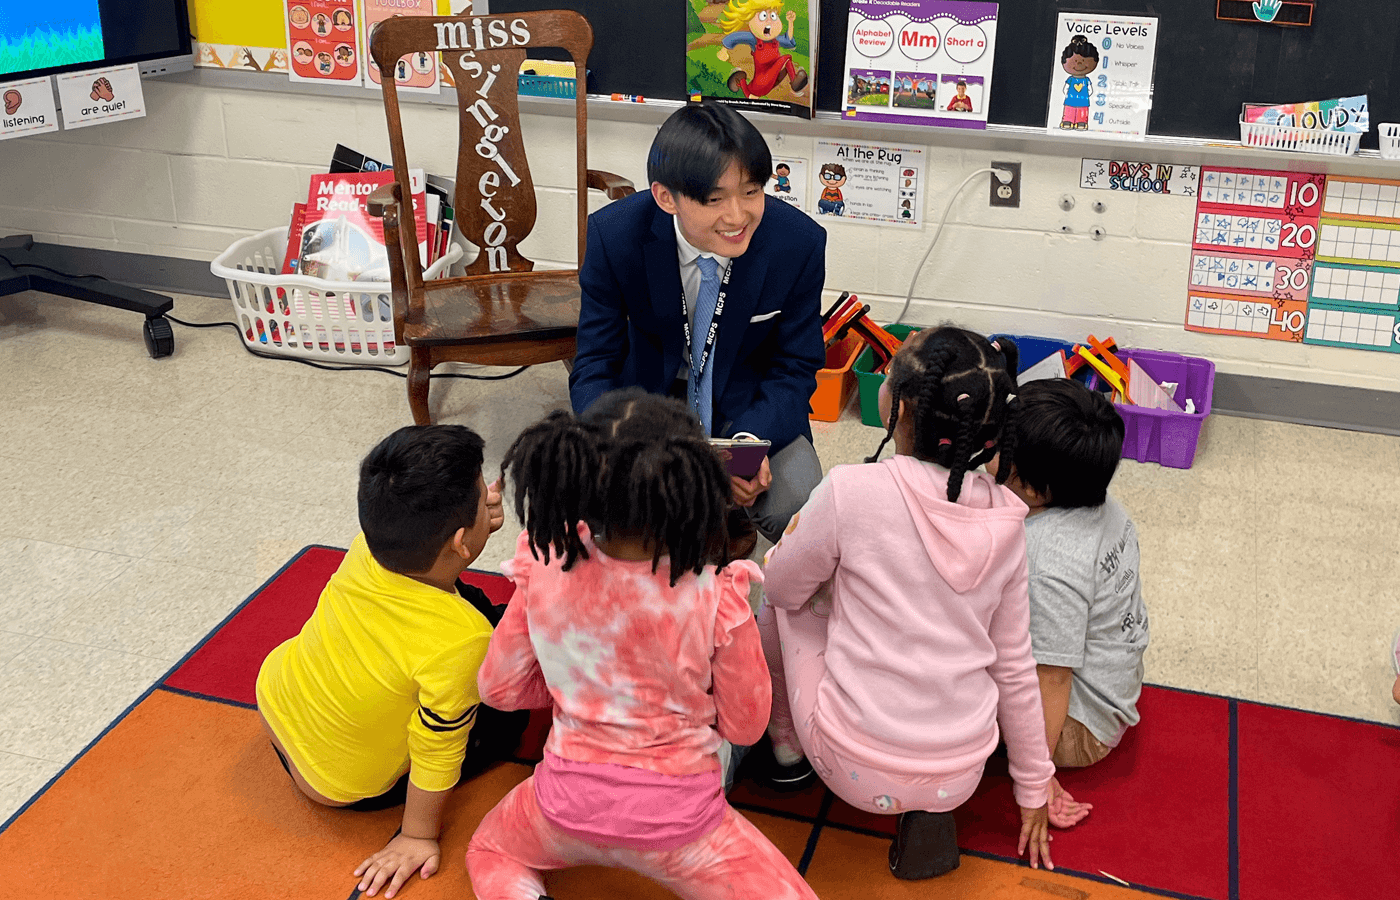 As the 2022–23 student member of the school board in Montgomery County, Maryland, Arvin Kim visited Highland Elementary School and other district schools to learn more about issues that affect student learning in the classroom.